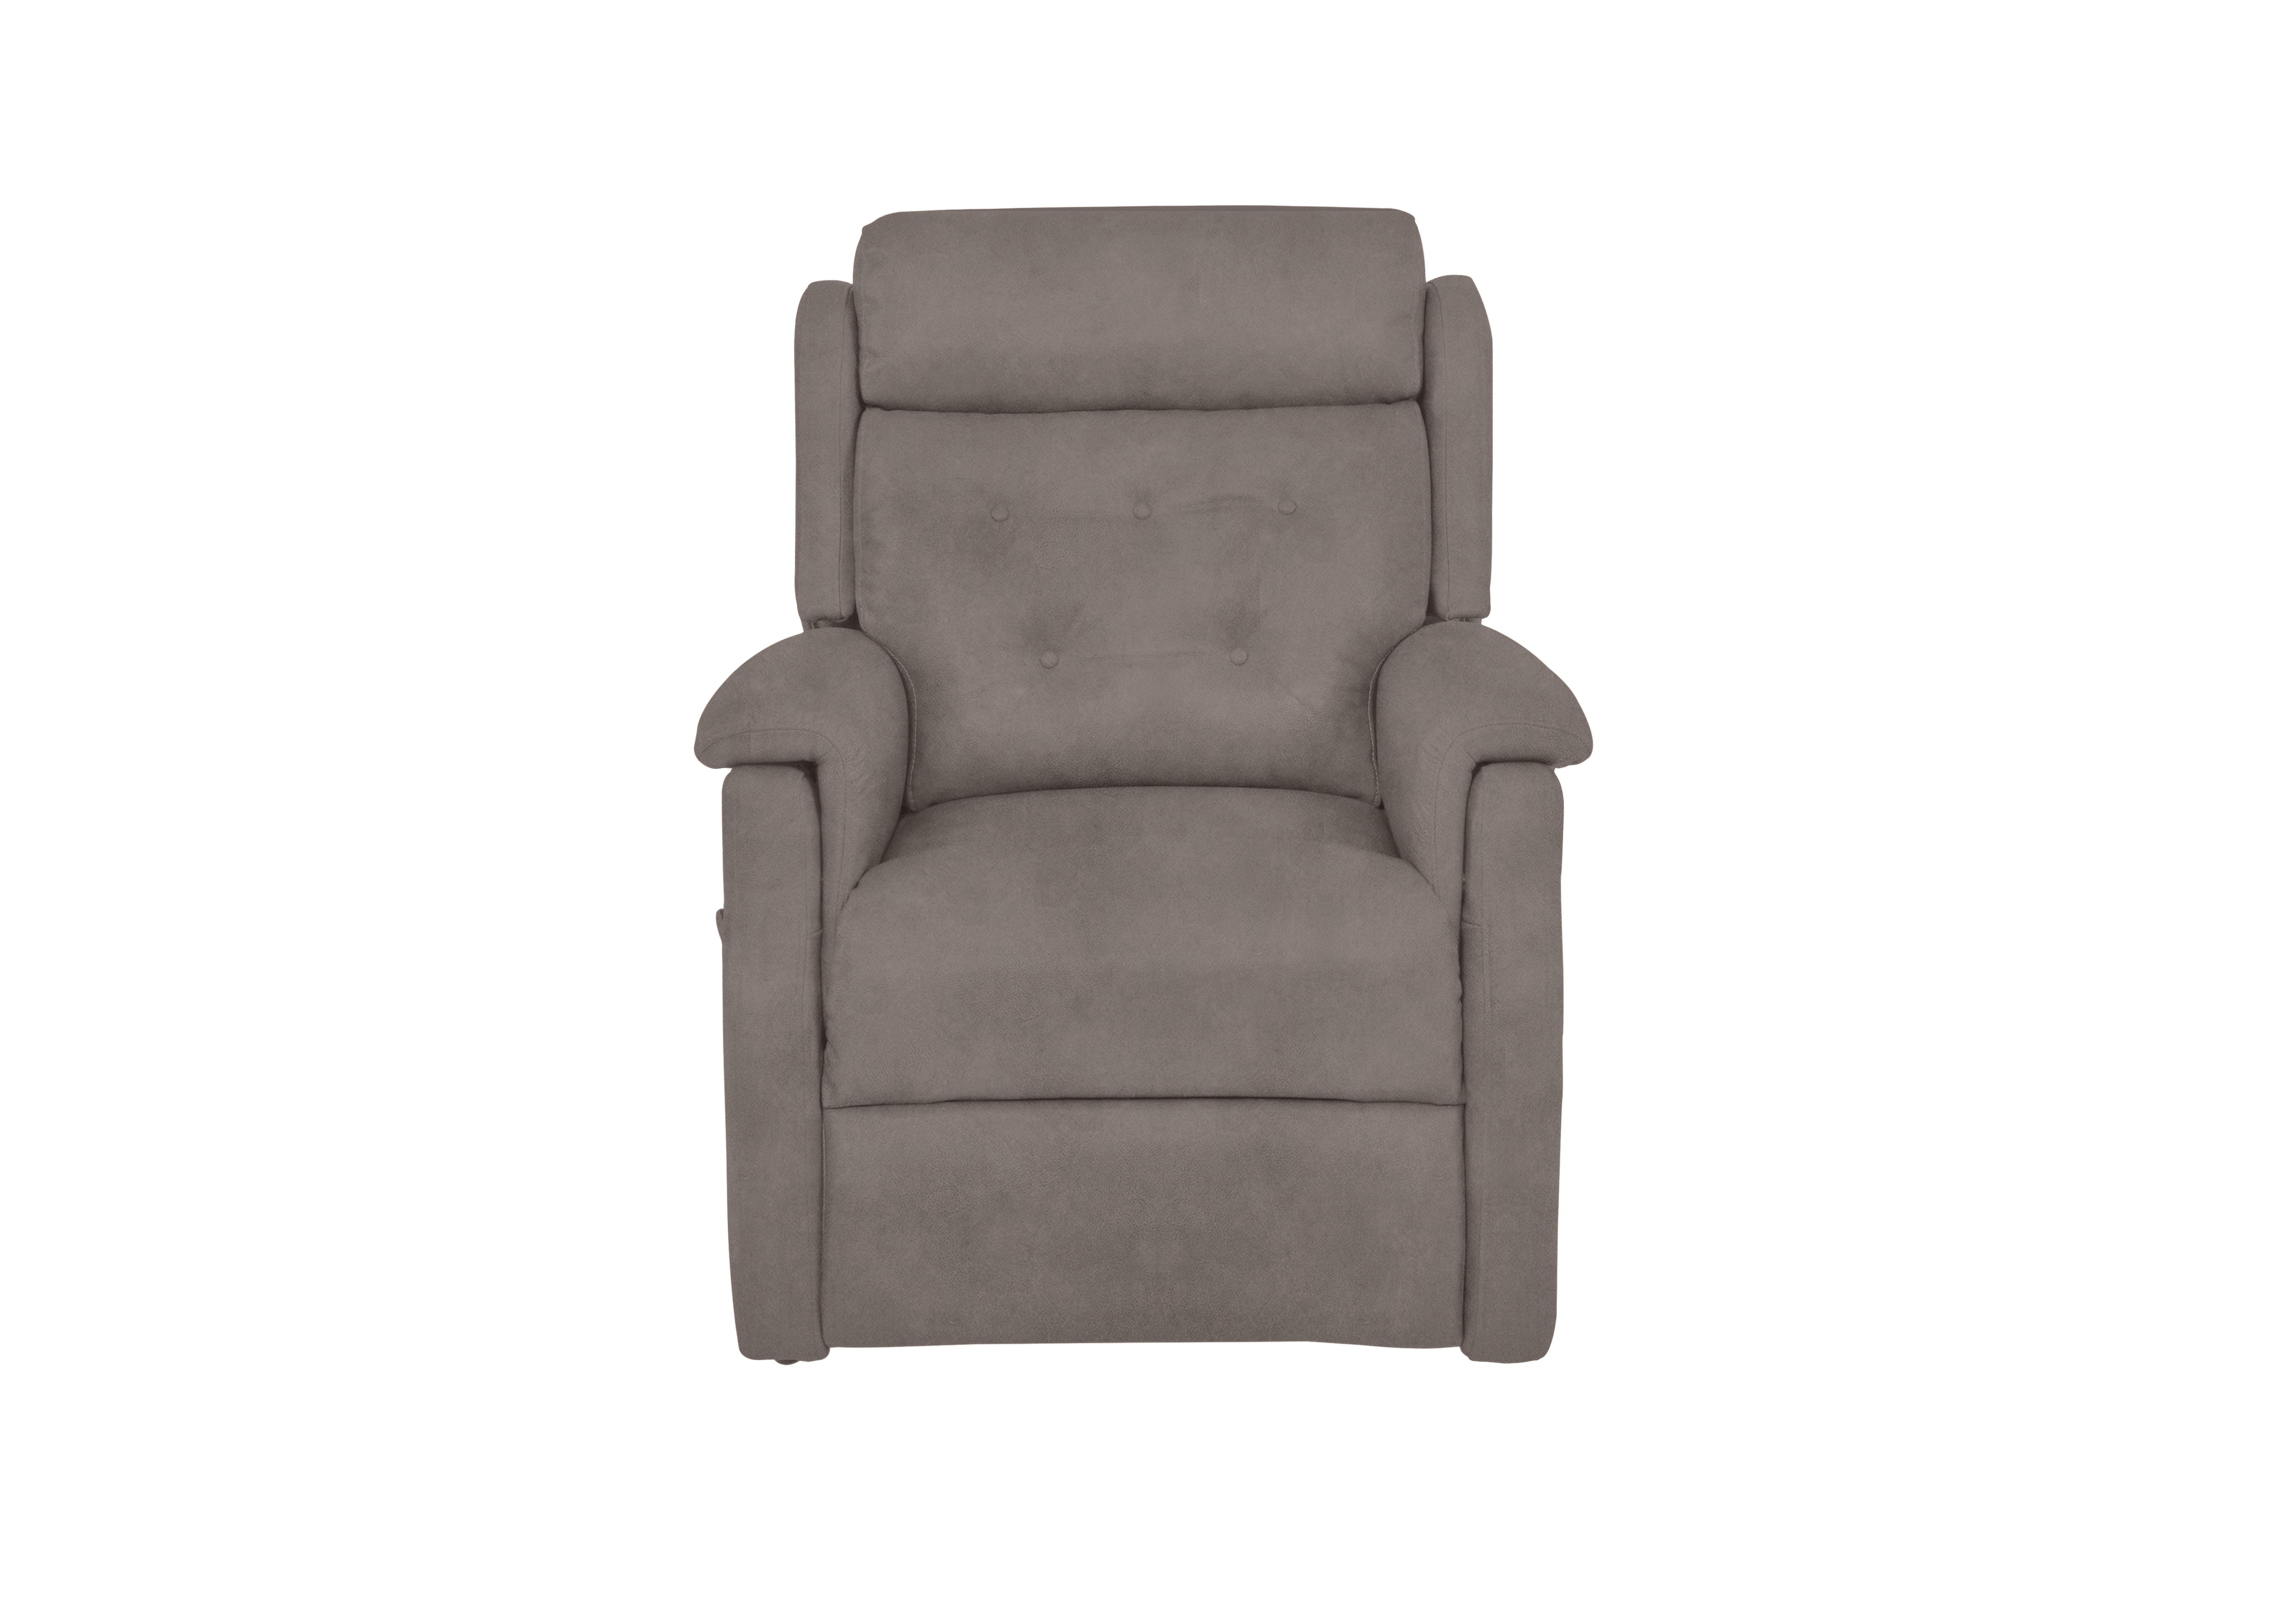 My Chair Scott Fabric Lift and Rise Chair in 43504 Mocha Dexter 04 on Furniture Village